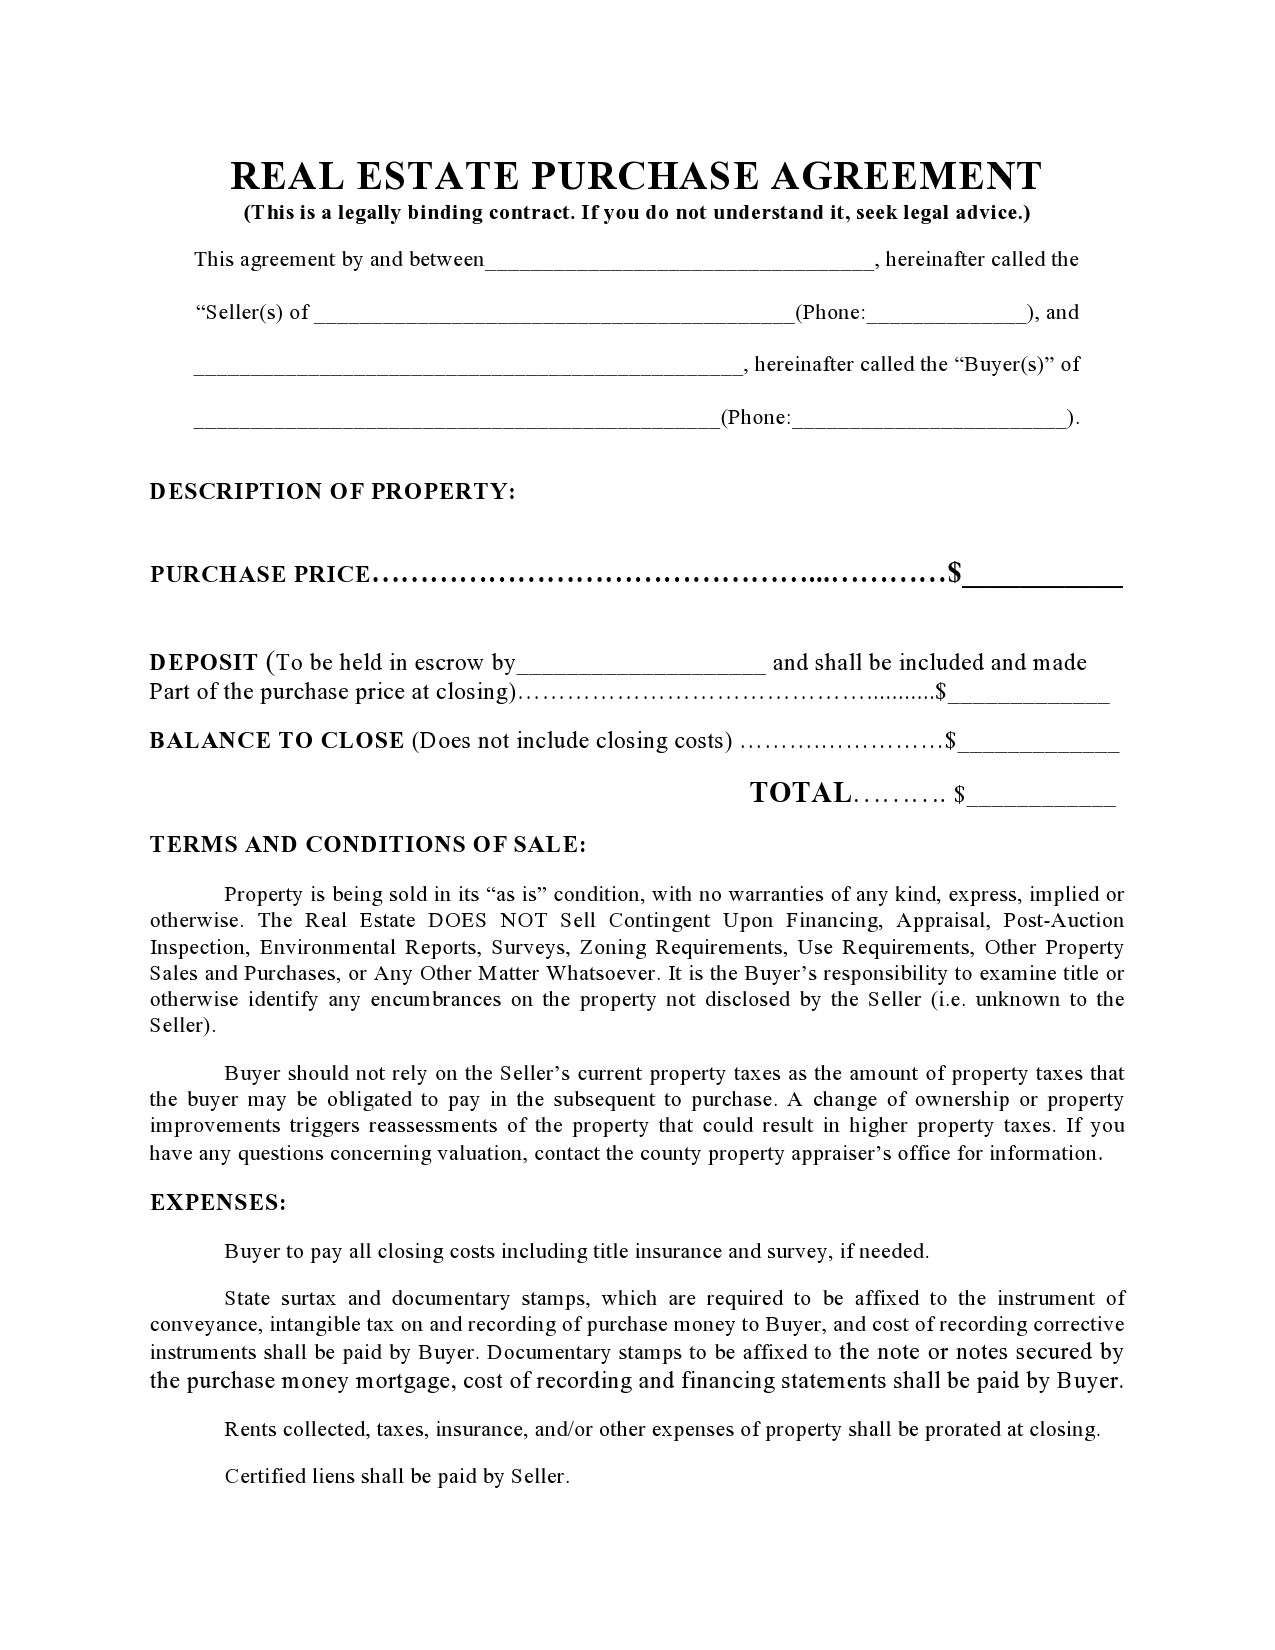 Free real estate purchase agreement 07